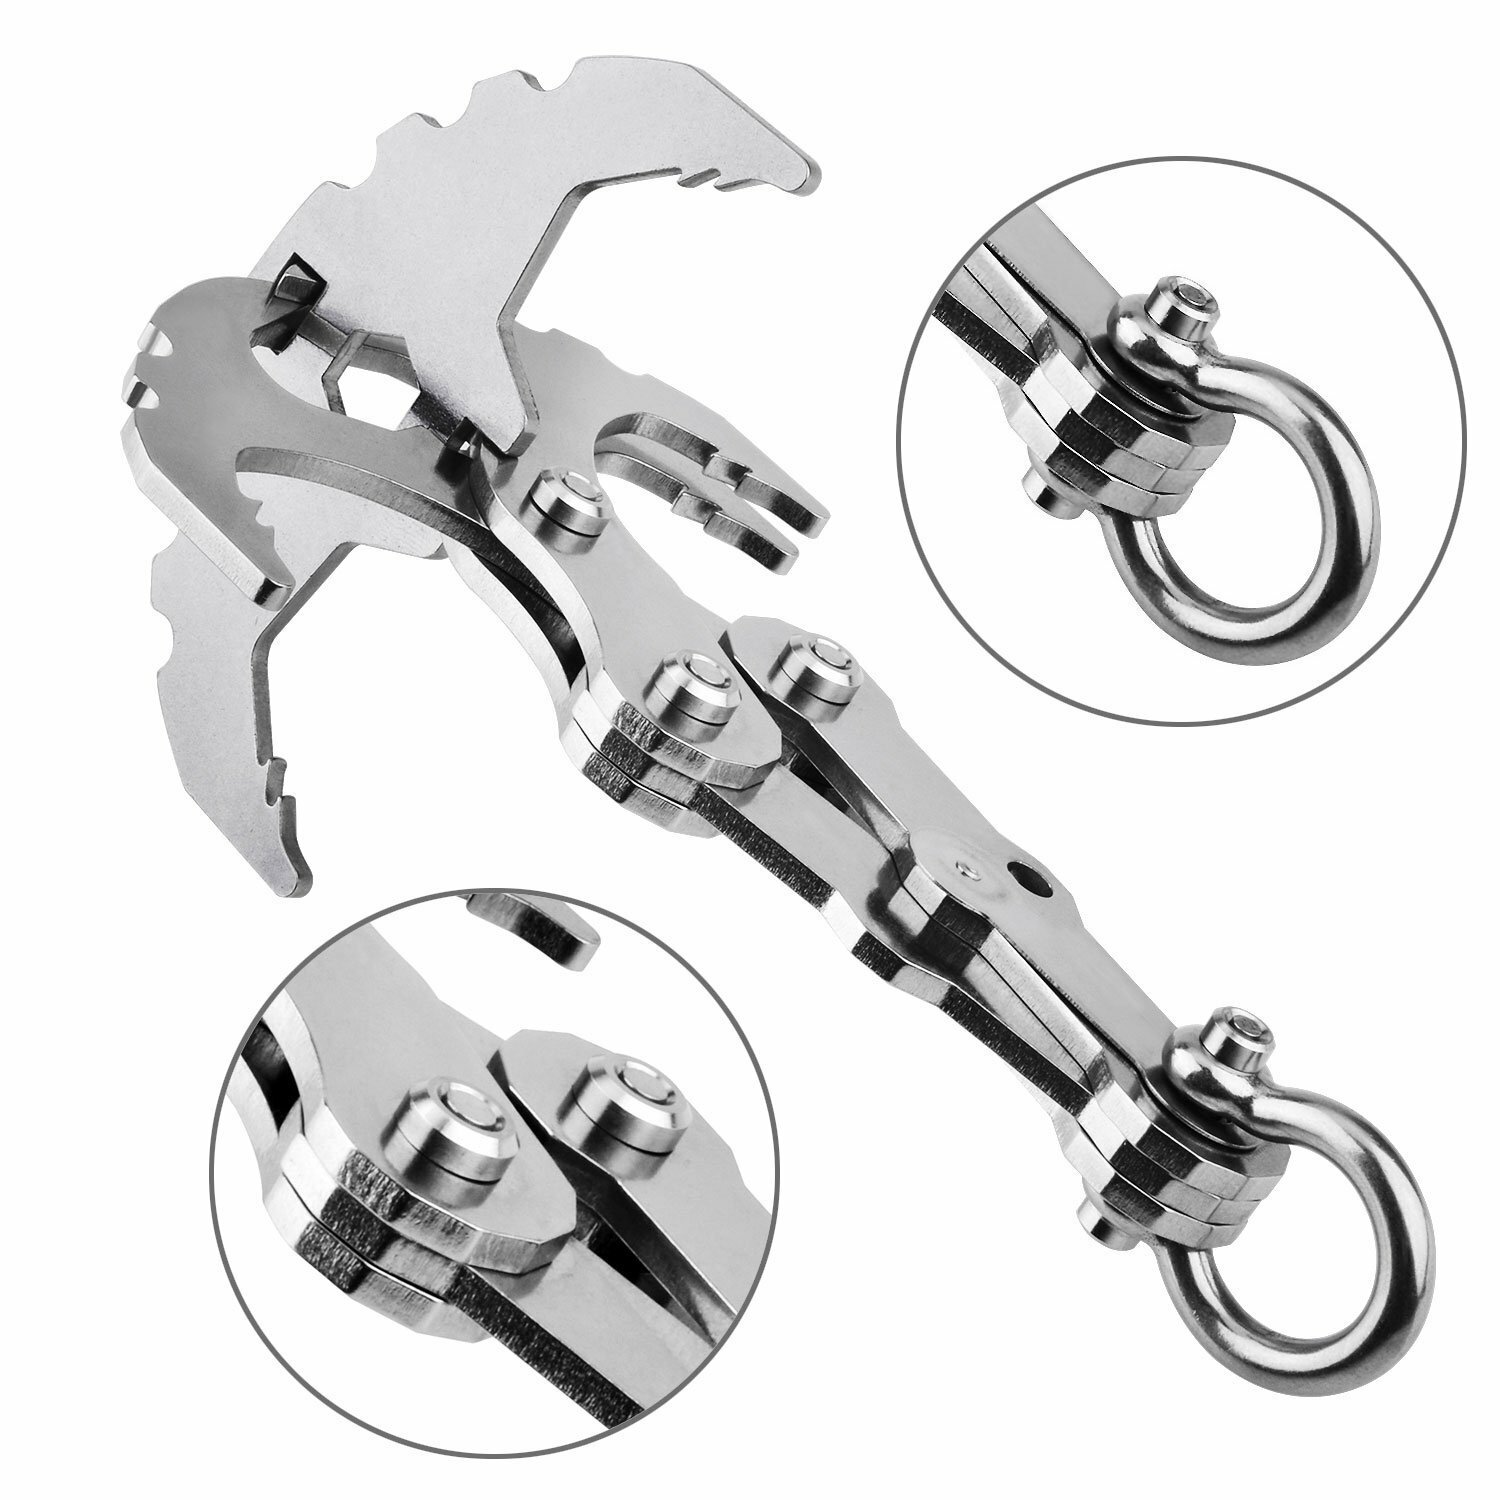 Folding Gravity Grappling Hook Outdoor Climbing Claw Clasp Survival Carabiner Tool Set